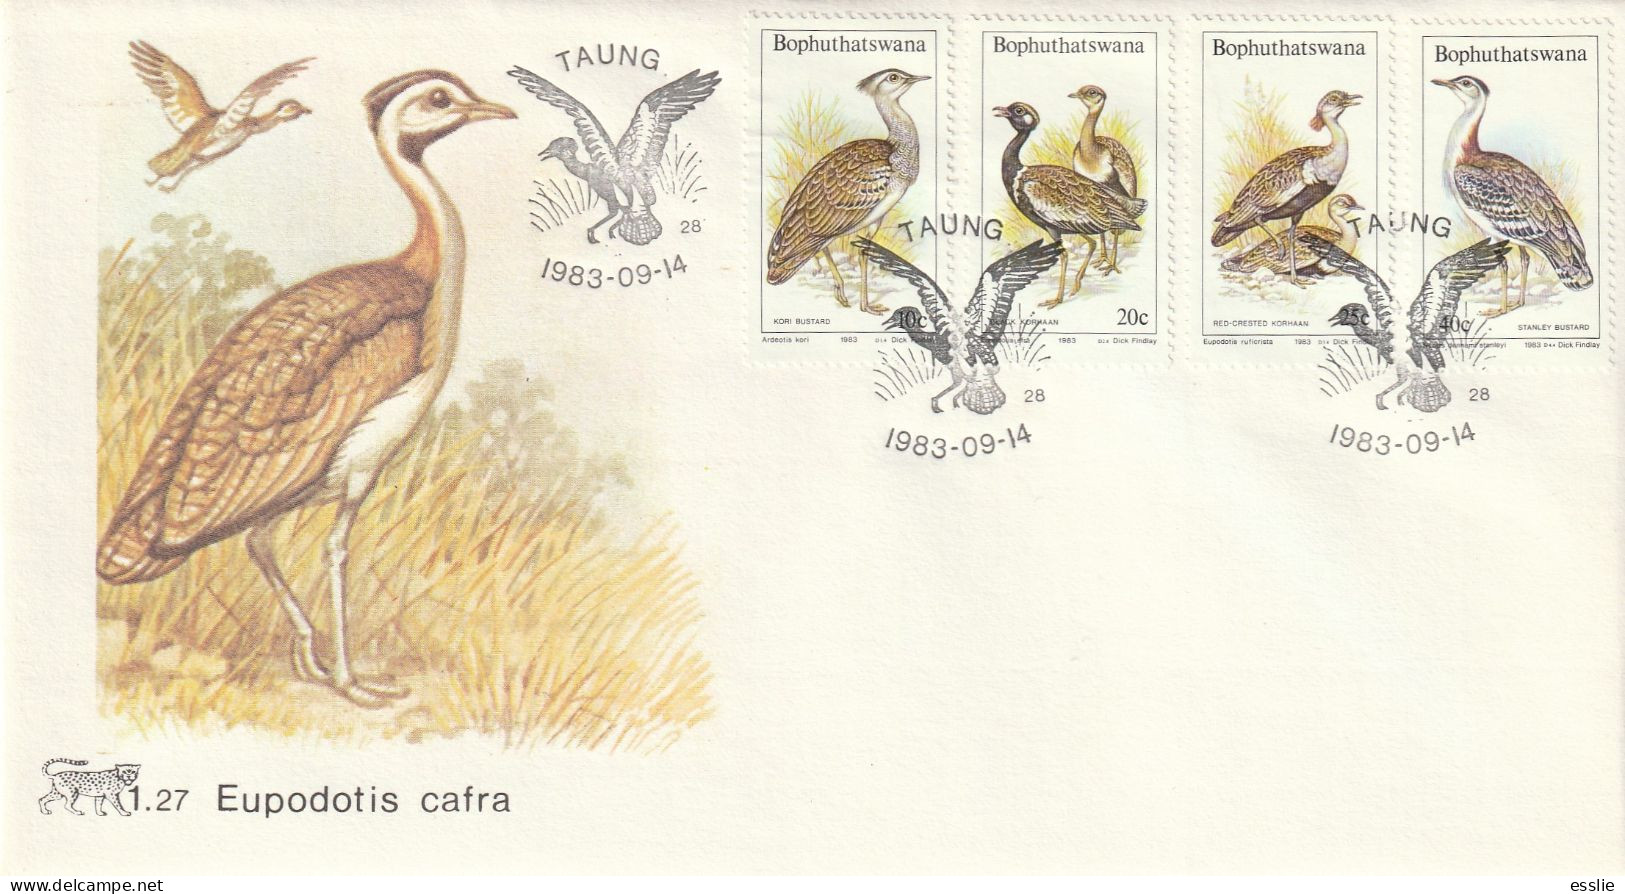 Bophuthatswana - 1983 - Birds Vogel Of The Veld Bustards - First Day Cover - Small - Cranes And Other Gruiformes